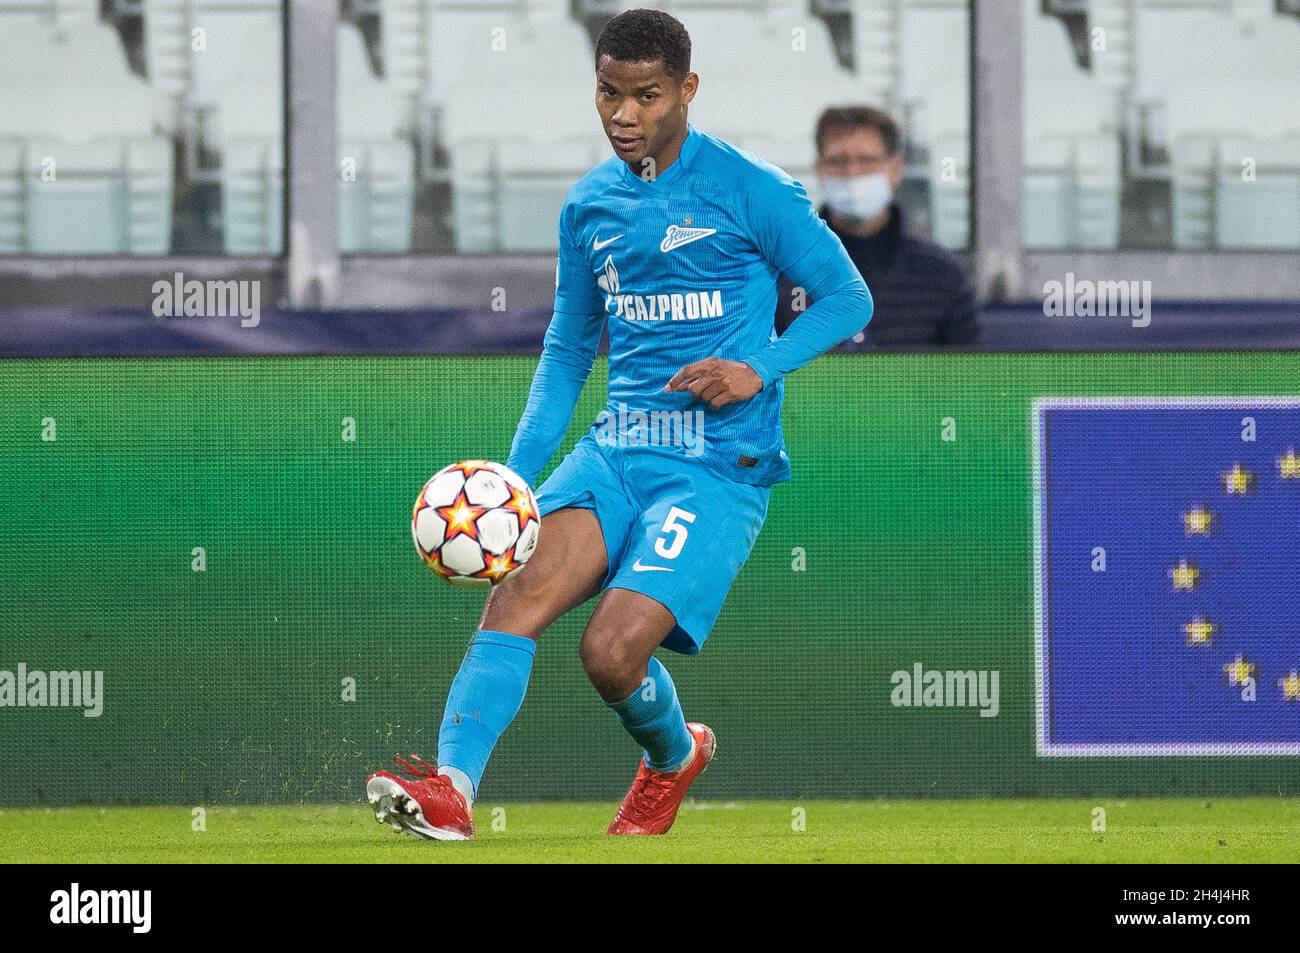 TURIN, ITALY - NOVEMBER 02: Wílmar Barrios of Zenit St. Petersburg during the UEFA Champions League group H match between Juventus and Zenit St. Petersburg at  on November 2, 2021 in Turin, Italy. (Photo by MB Media) Stock Photo